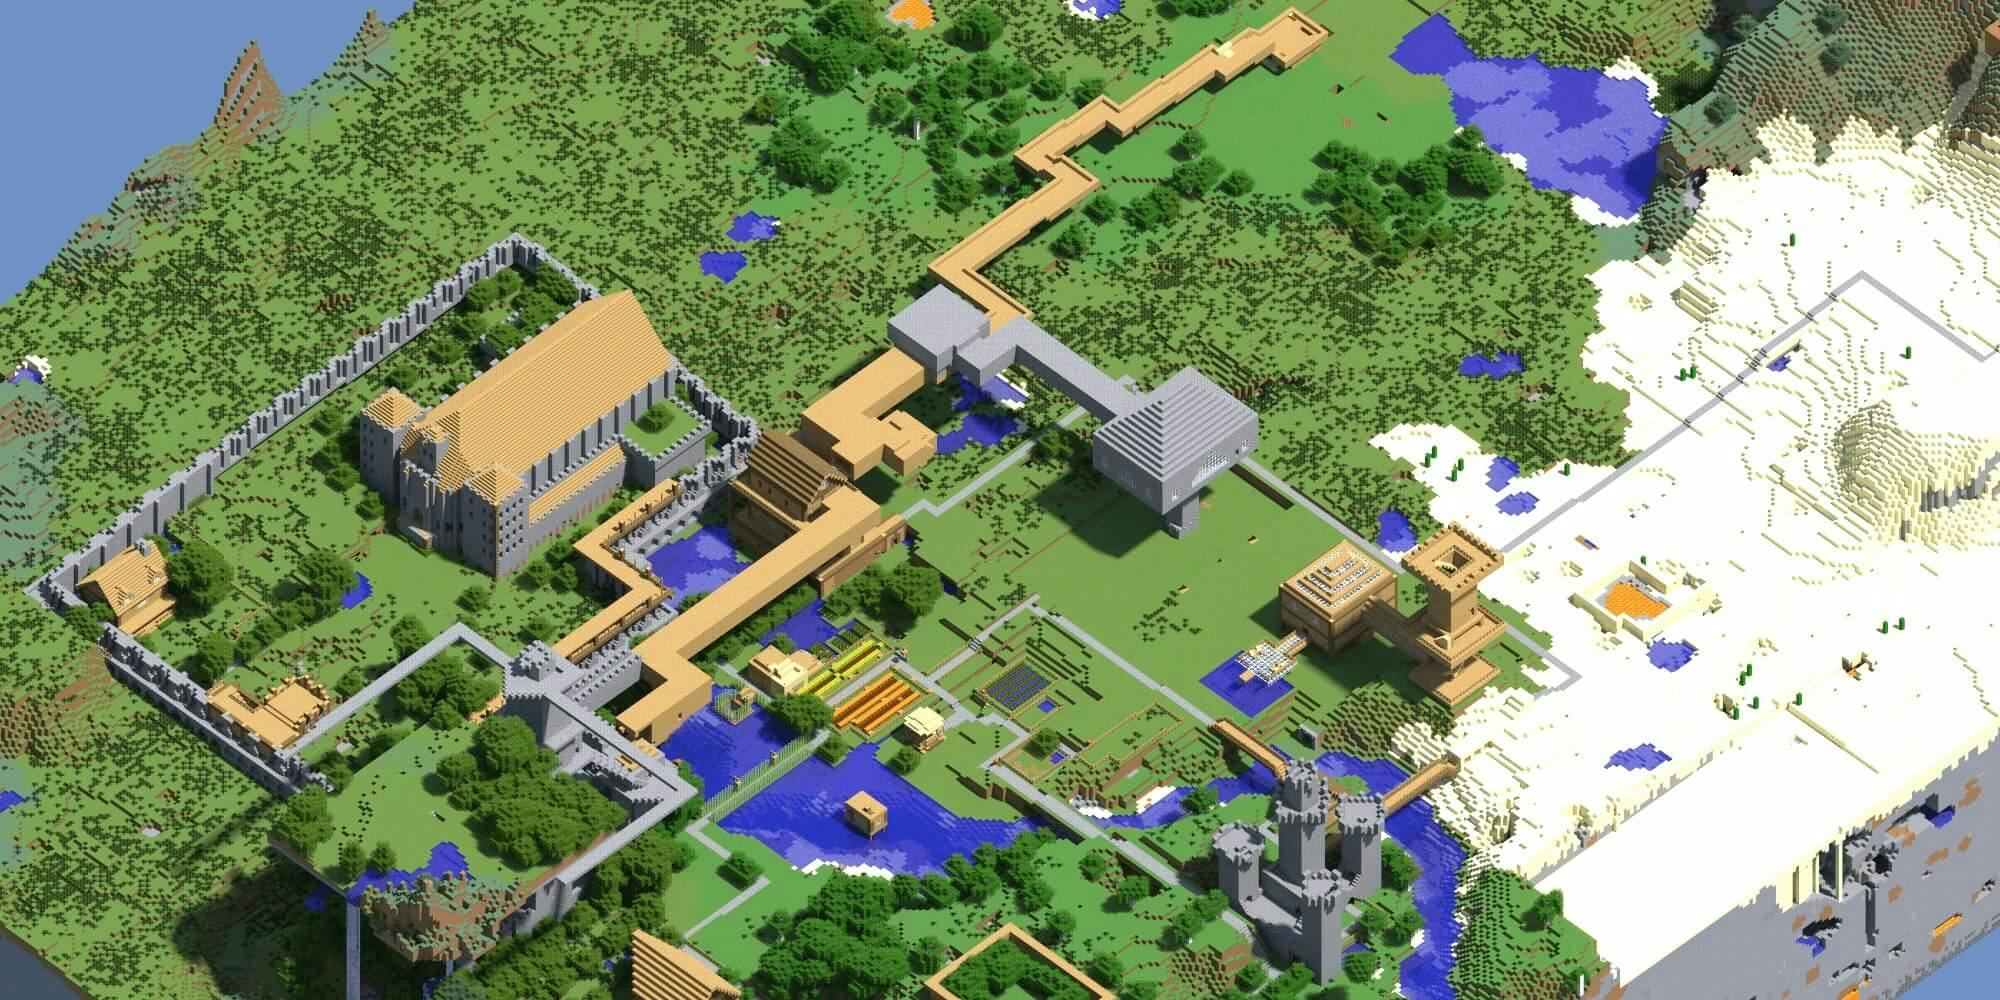 A render of a Minecraft castle.